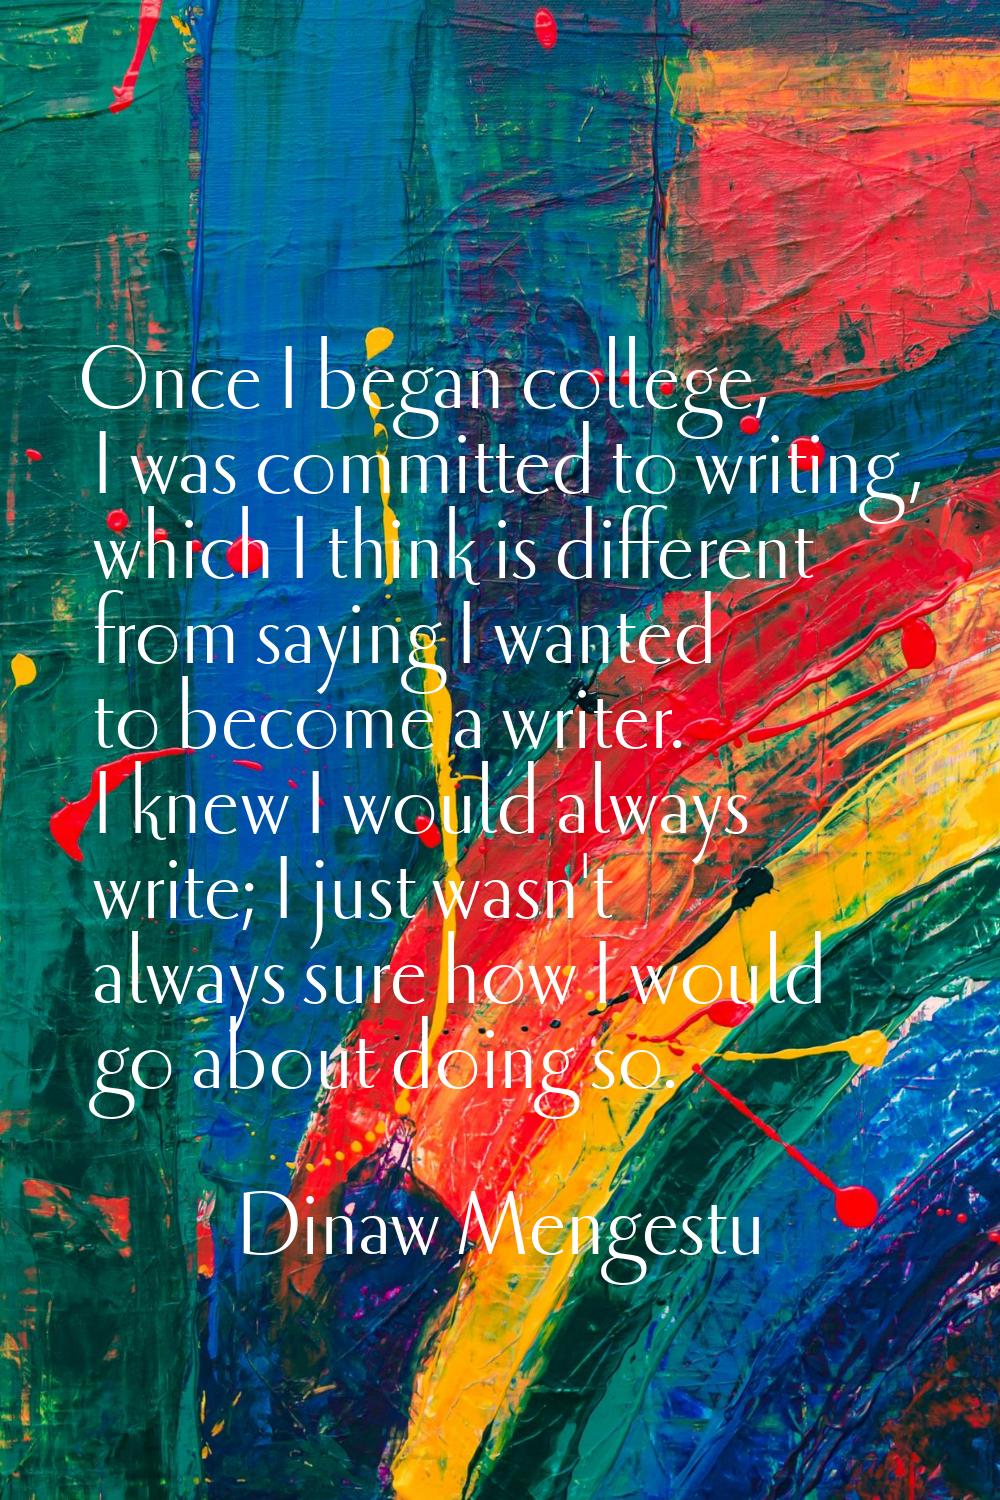 Once I began college, I was committed to writing, which I think is different from saying I wanted t